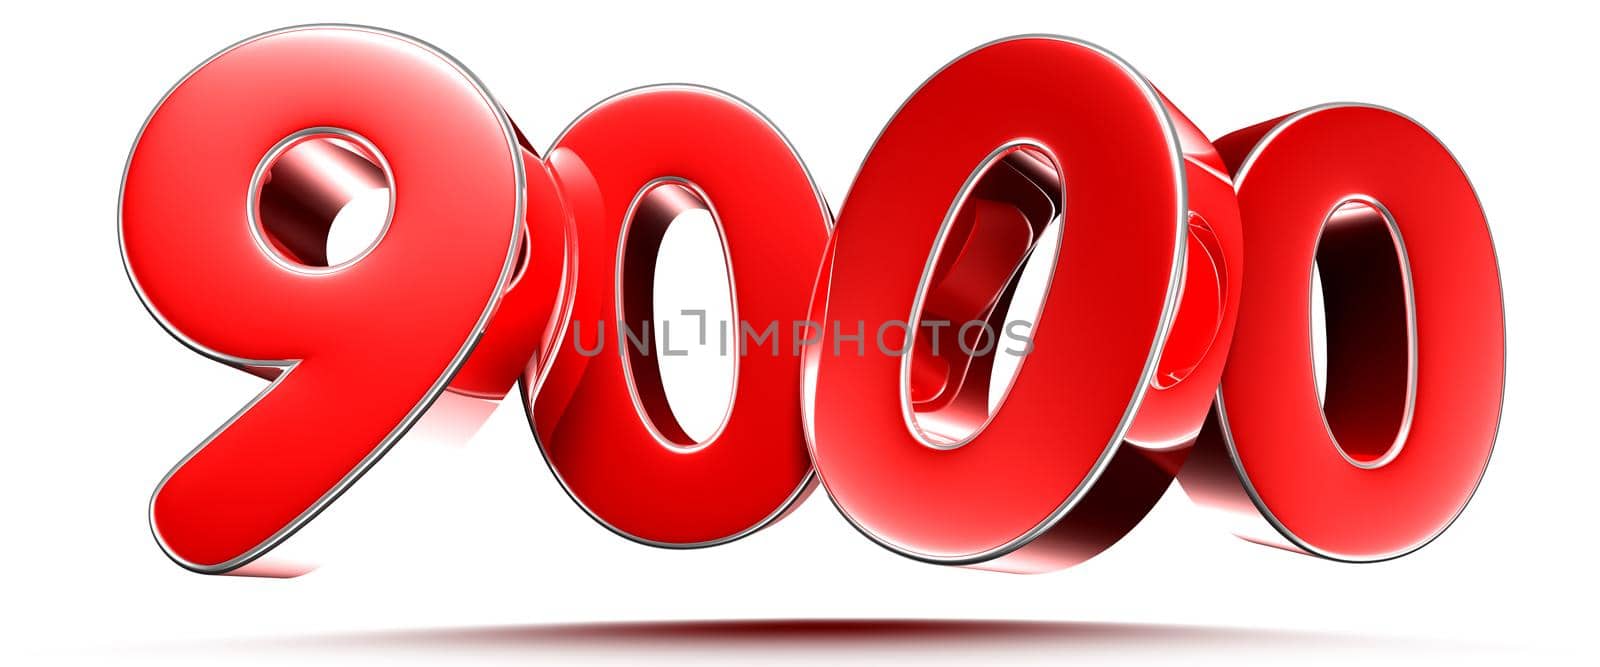 Rounded red numbers 9000 on white background 3D illustration with clipping path